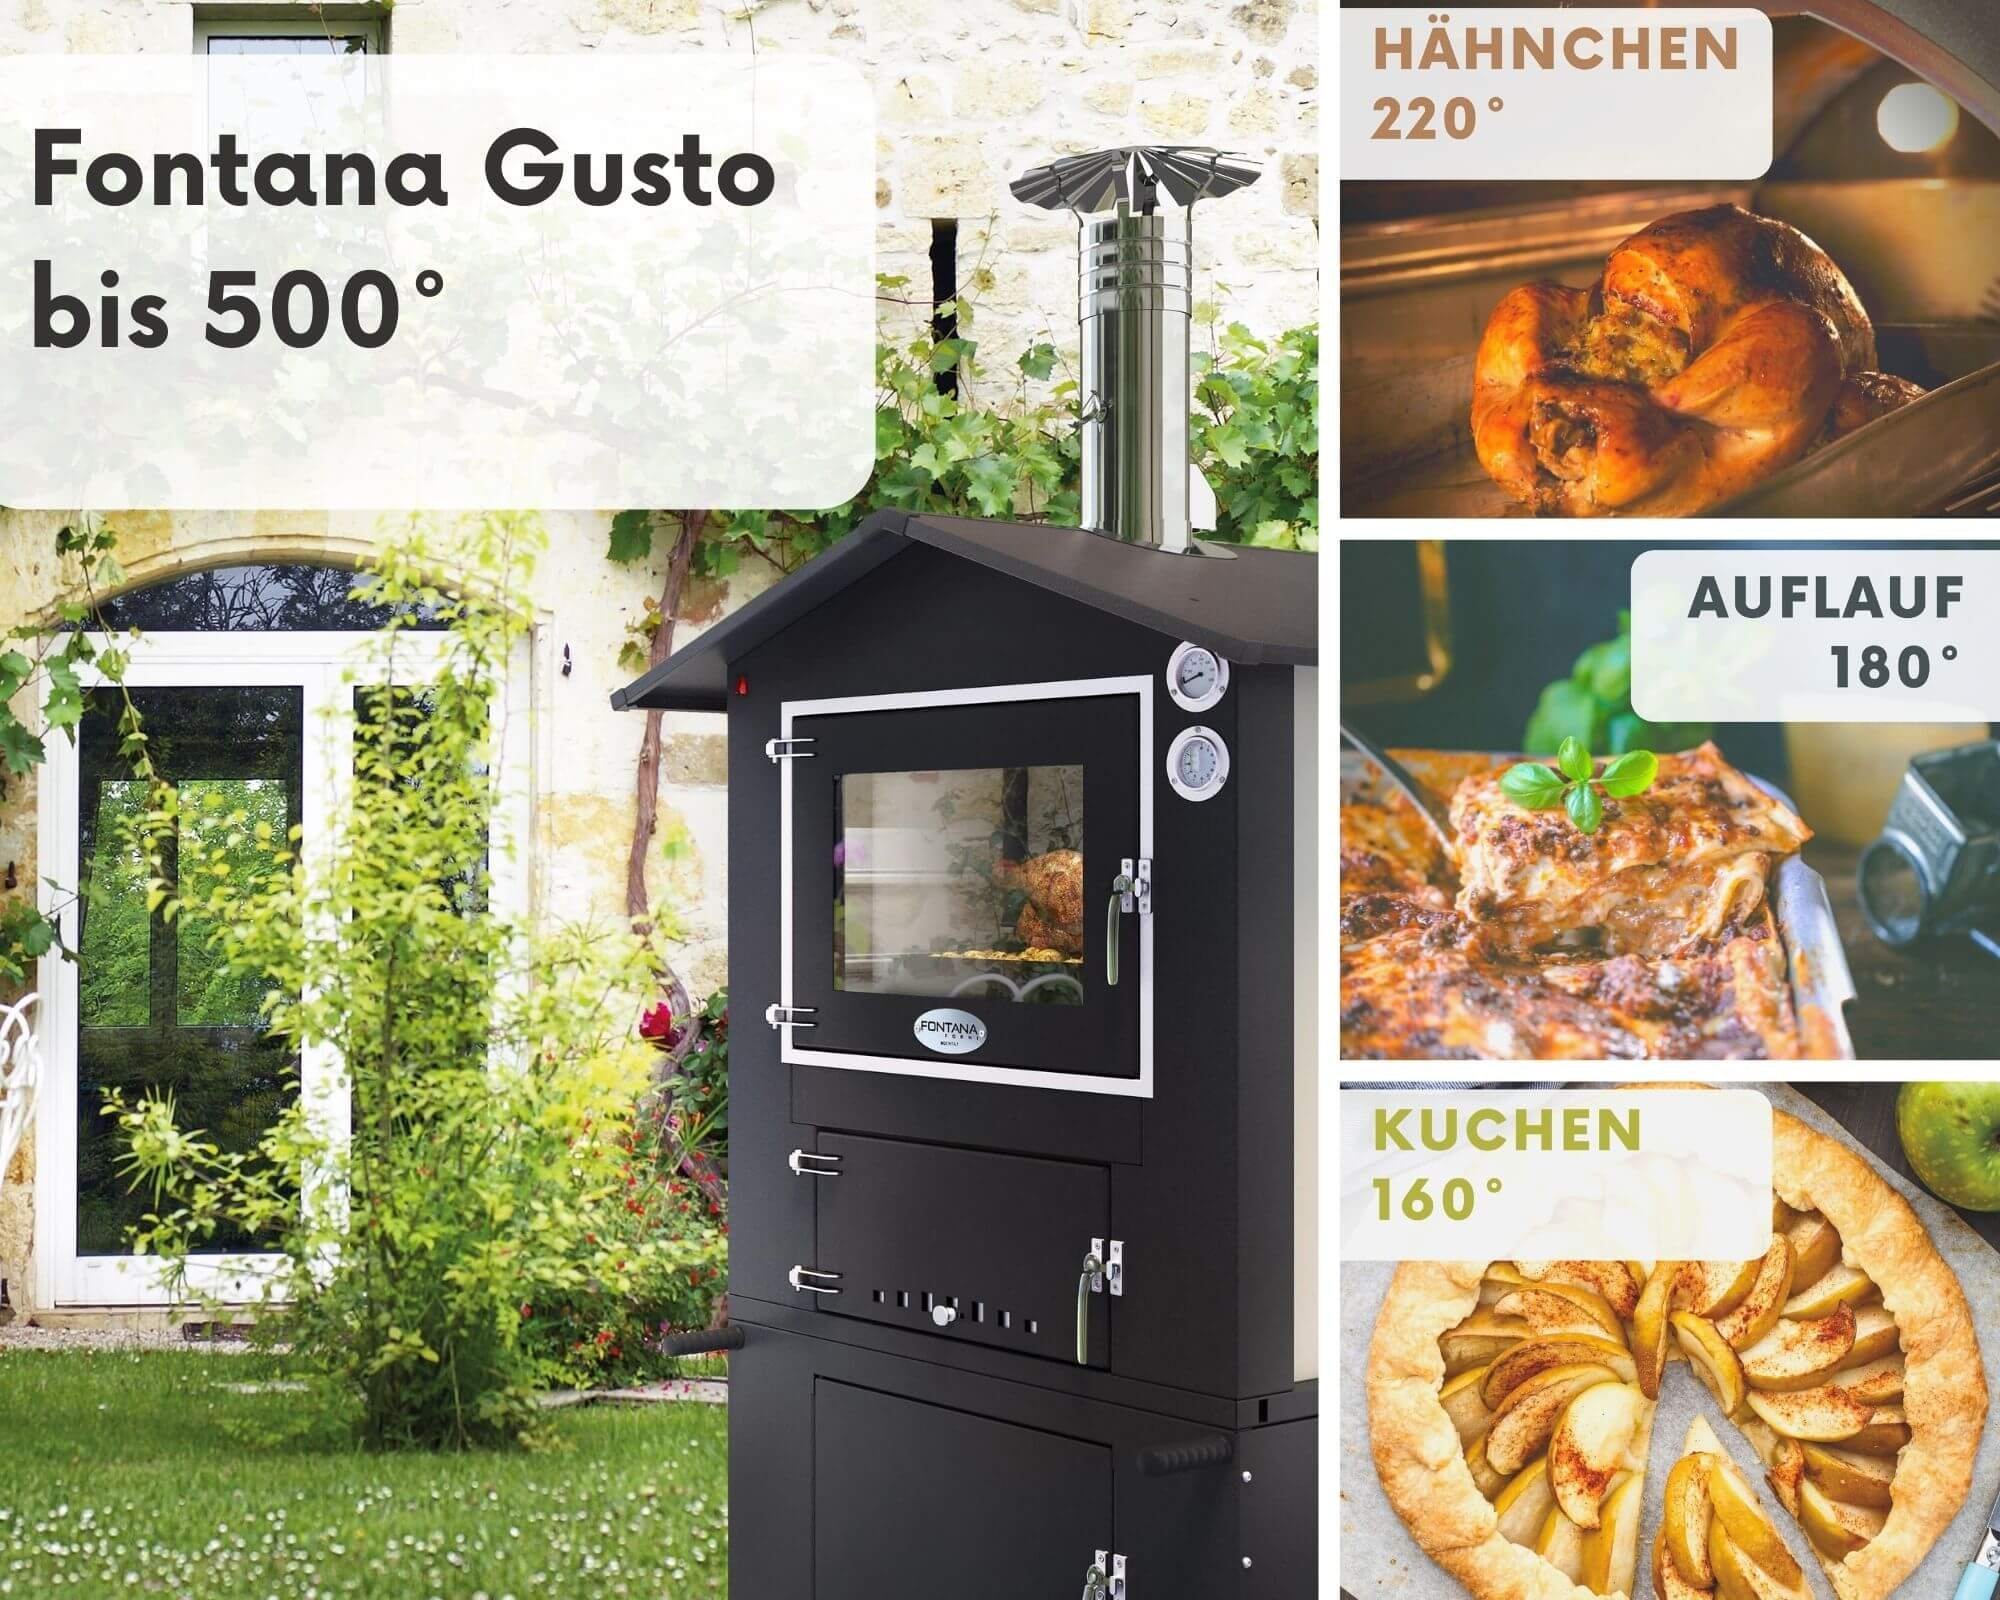 Bakehouse Fontana Gusto made of weatherproof stainless steel, indirect firing, three baking levels of 80x45cm each.